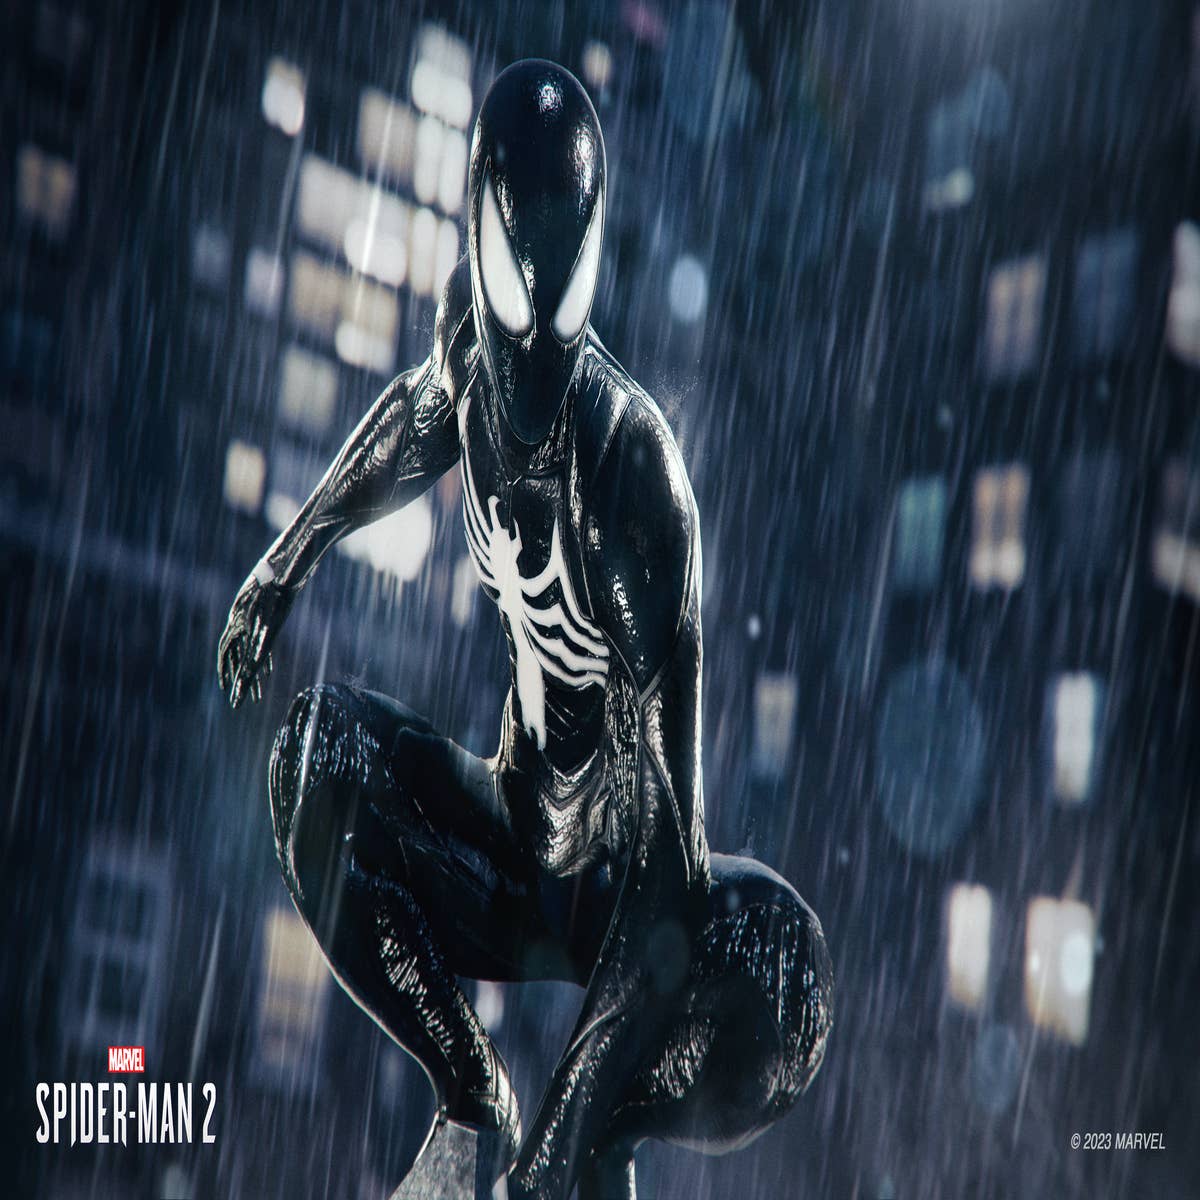 Marvel's Spider-Man 2: Release date, trailers, and gameplay details